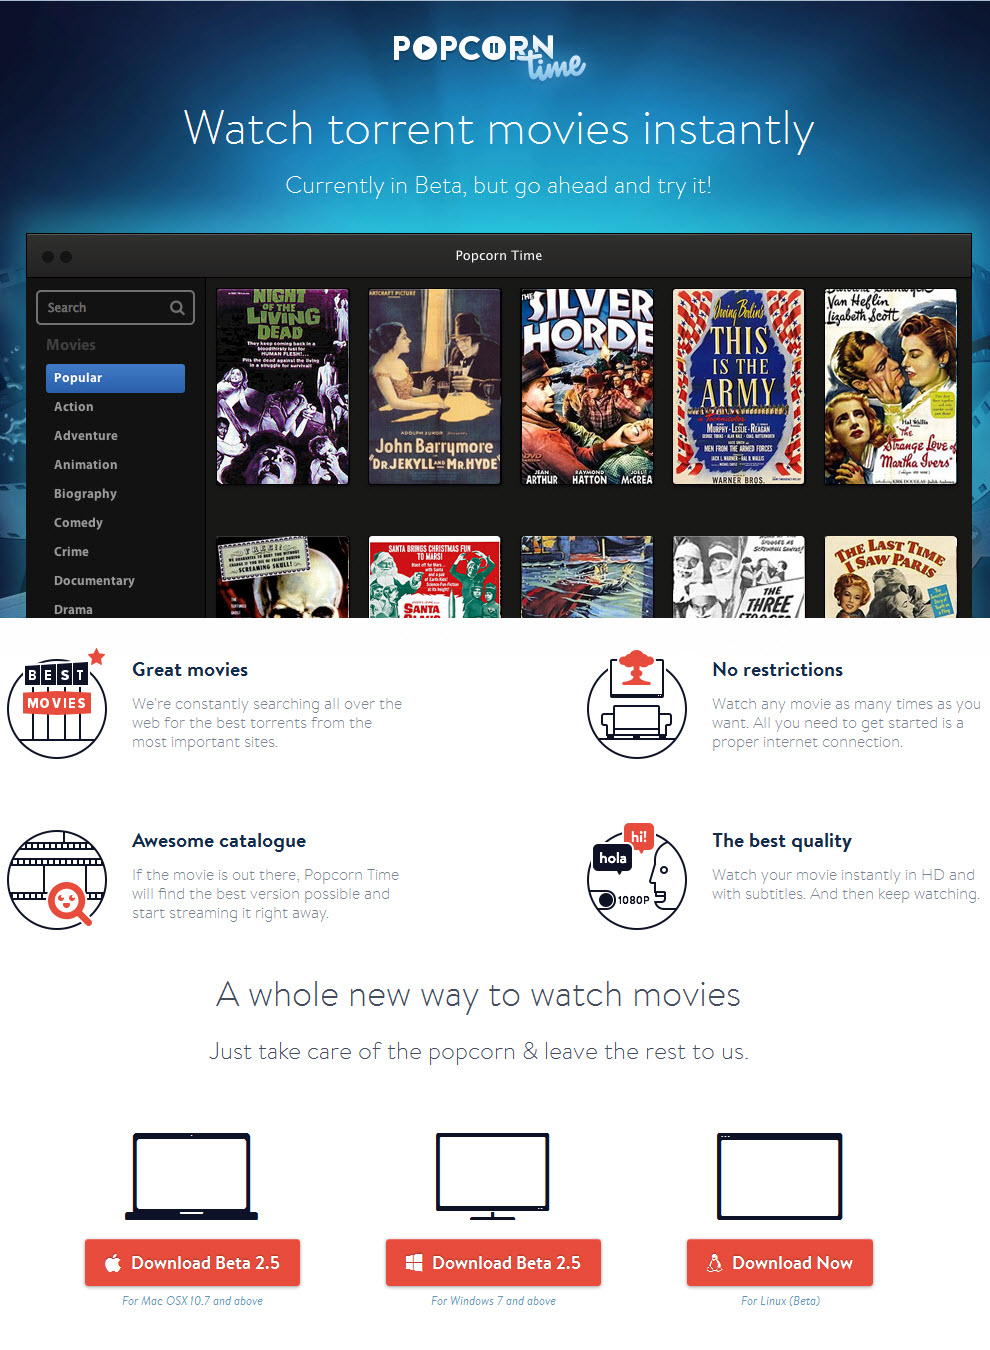 Popcorn Time Streams Latest HQ Movies From BitTorrent Just Like Netflix ...